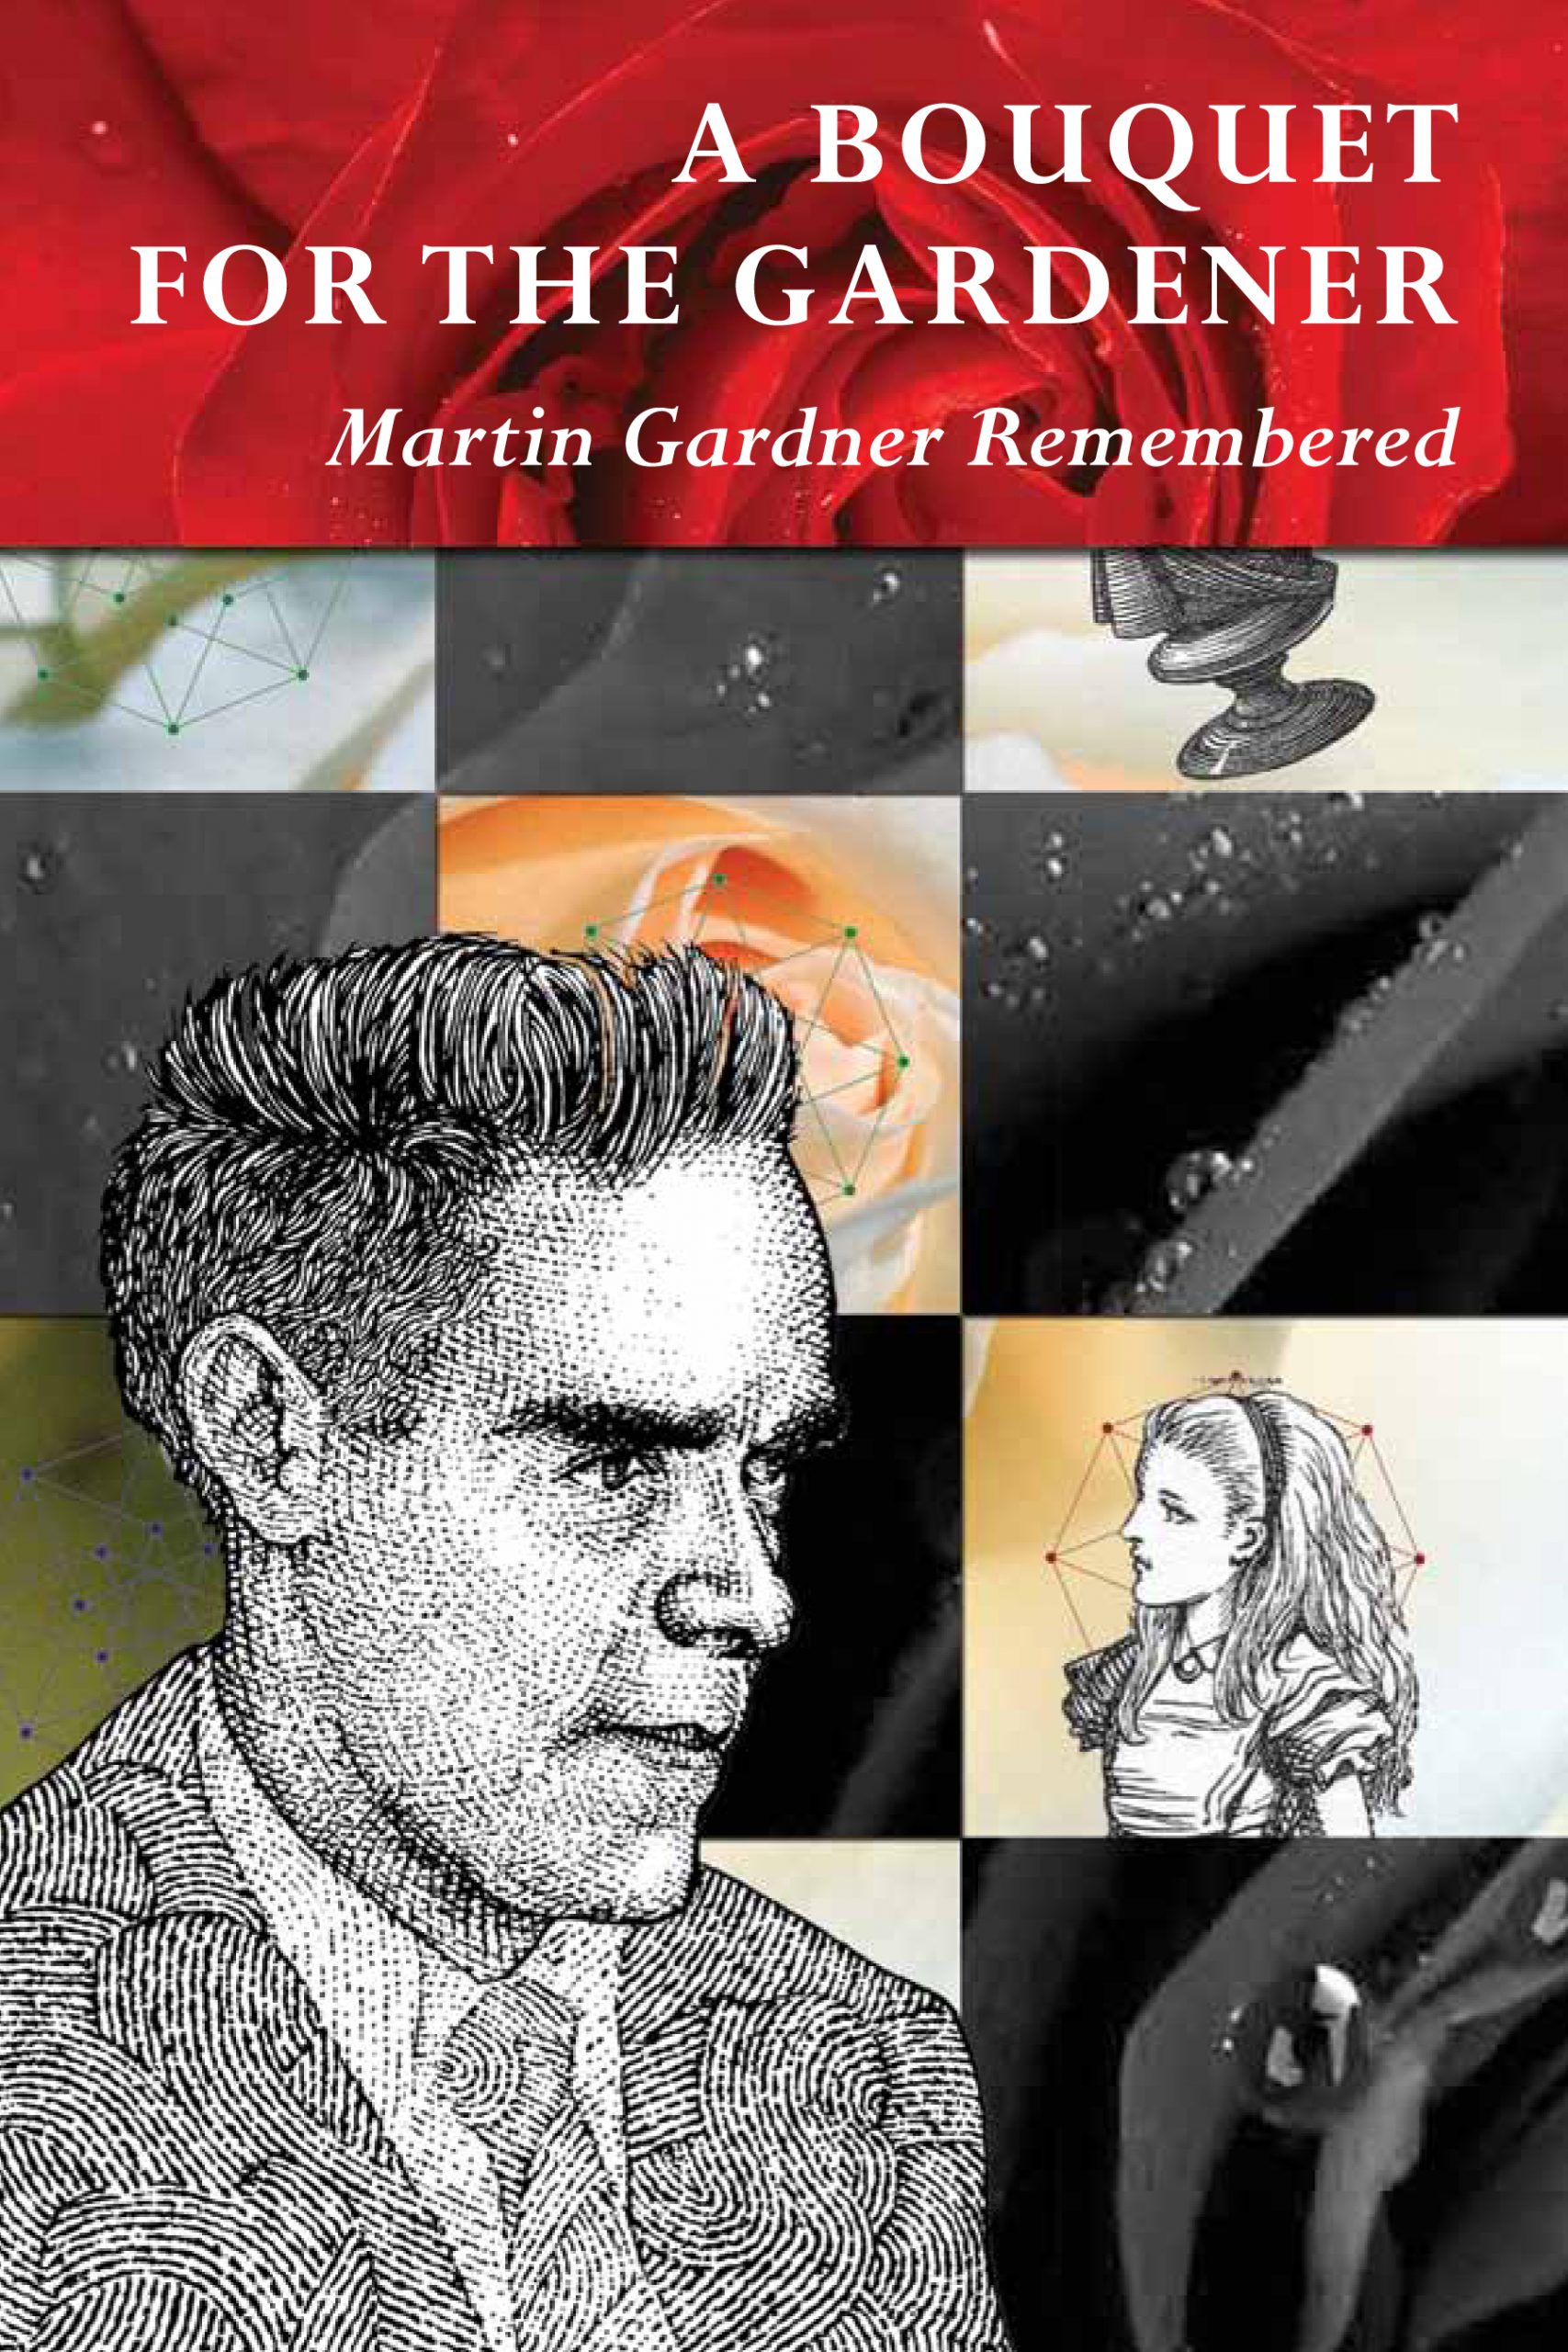 New LCSNA Martin Gardner Tribute Book Just Released!